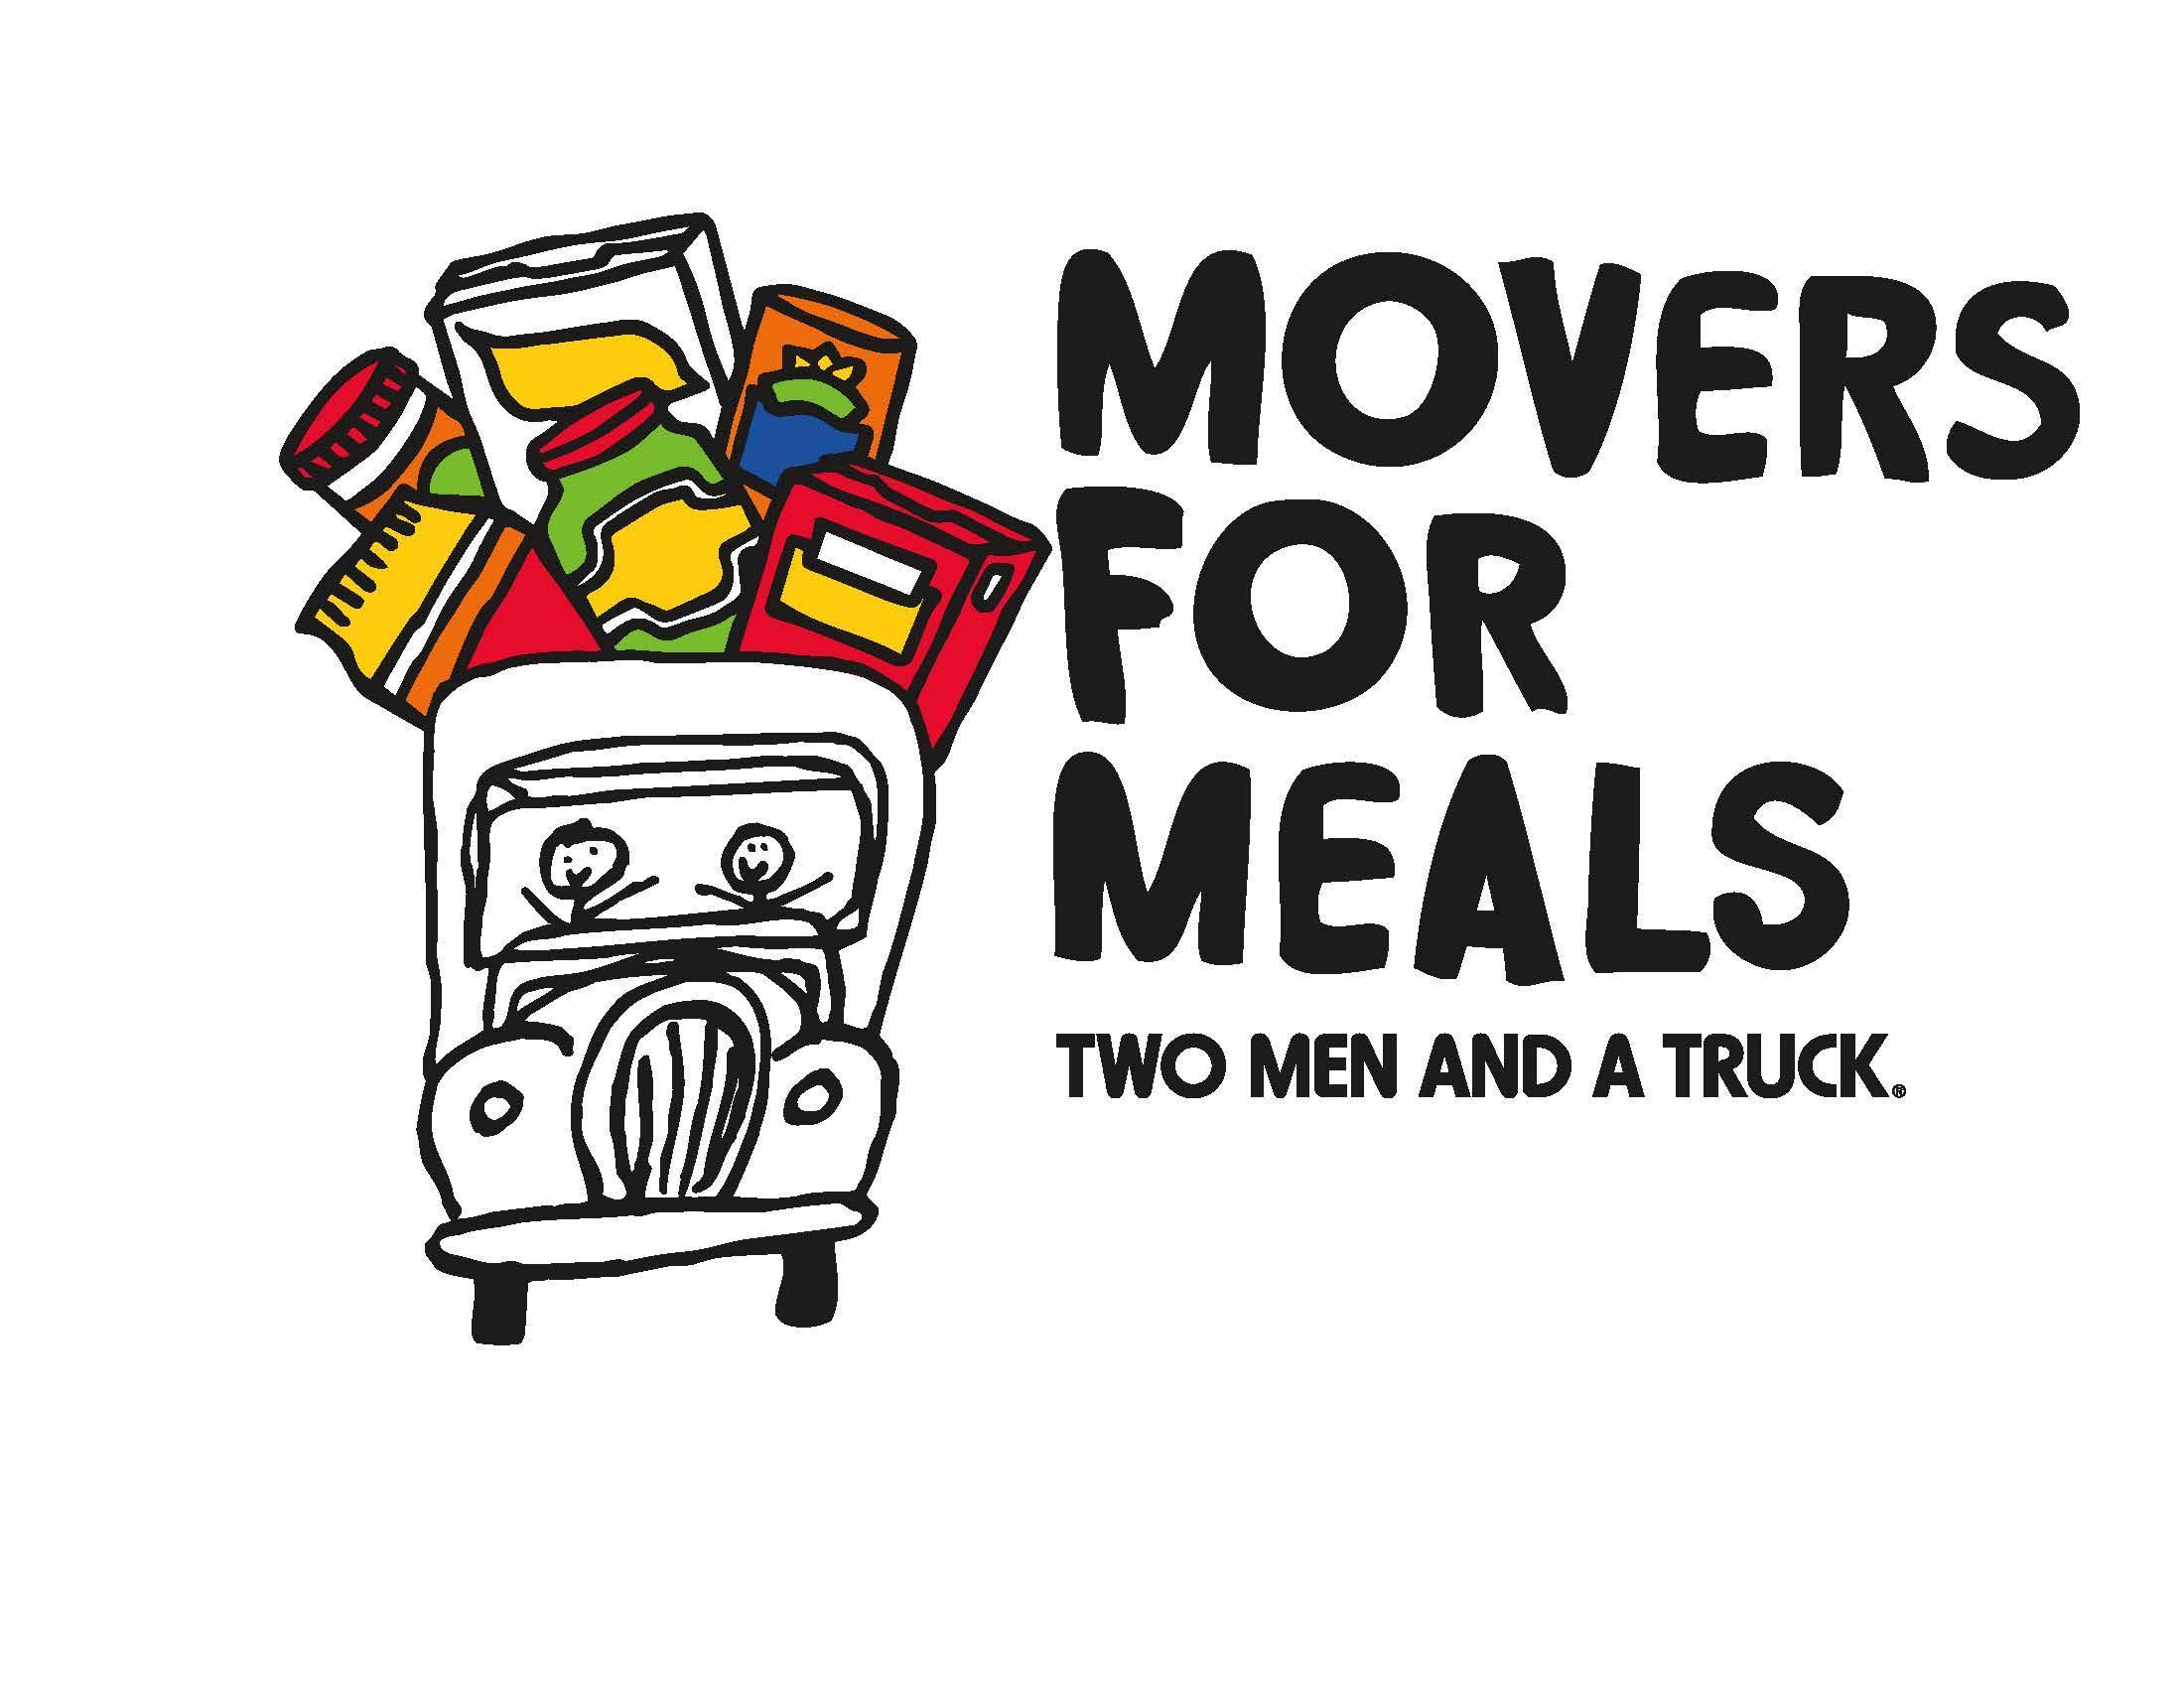 Movers for Meals food drive